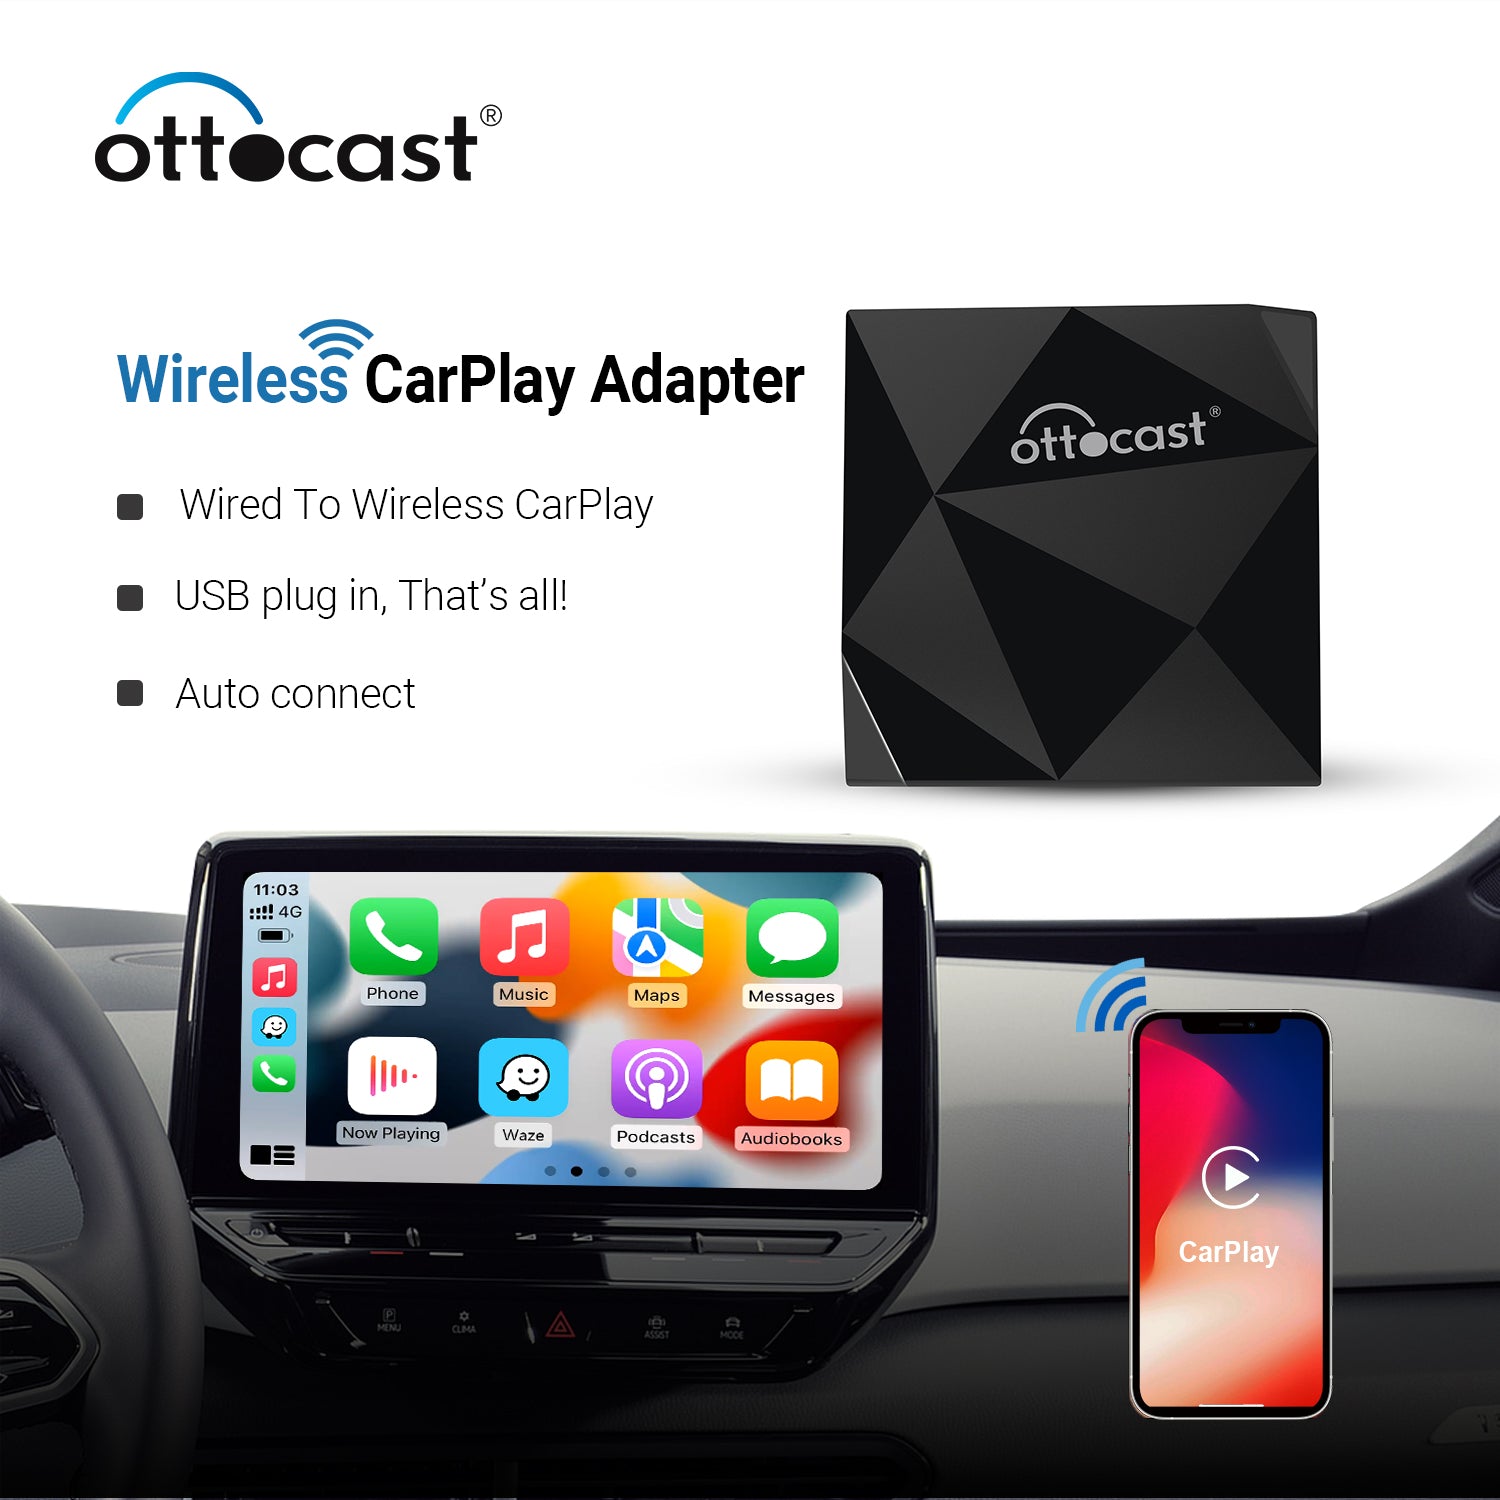  Ottocast Wireless CarPlay Android Auto Adapter Built-in  /Netflix - Support TF Card 5Ghz WiFi Auto Connect No Delay for All  Cars Model with OEM Wired CarPlay : Electronics